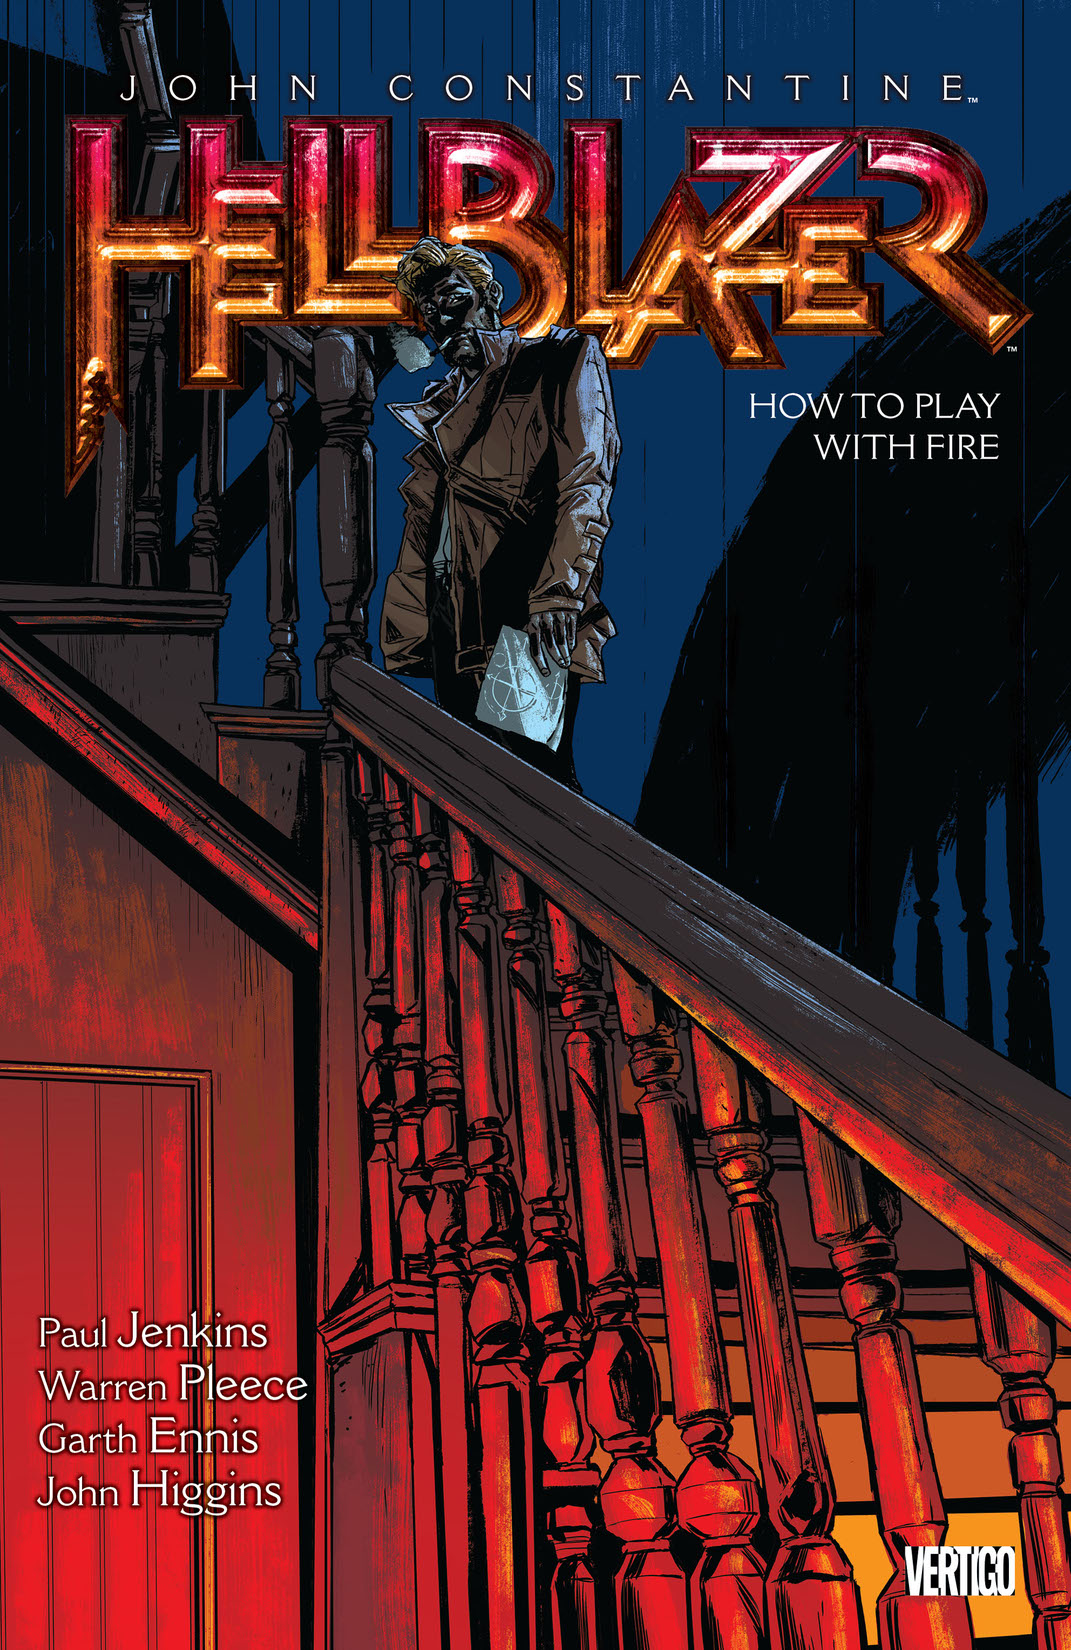 John Constantine, Hellblazer Vol. 12: How to Play with Fire preview images